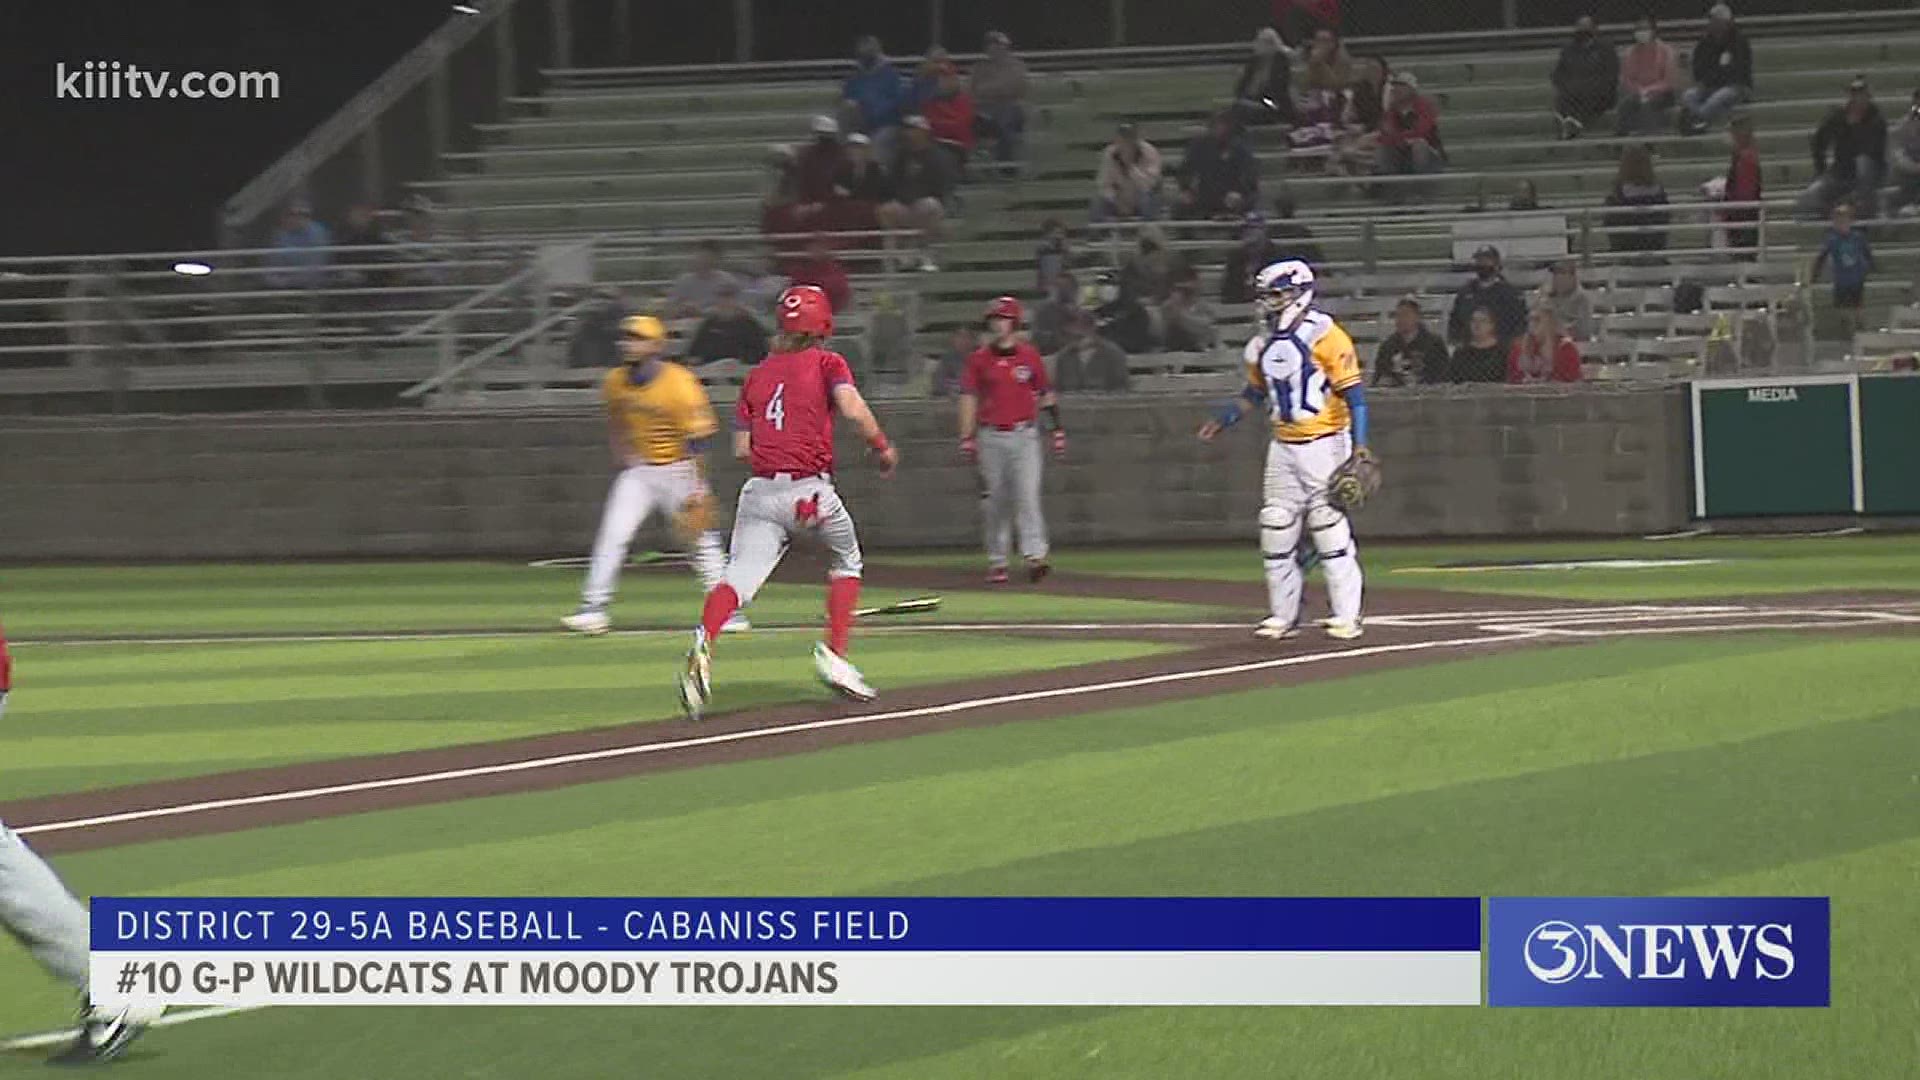 10th-ranked Gregory-Portland used a big third inning to beat Moody 8-3. Carroll fell to the Titans 7-0 in the early game.